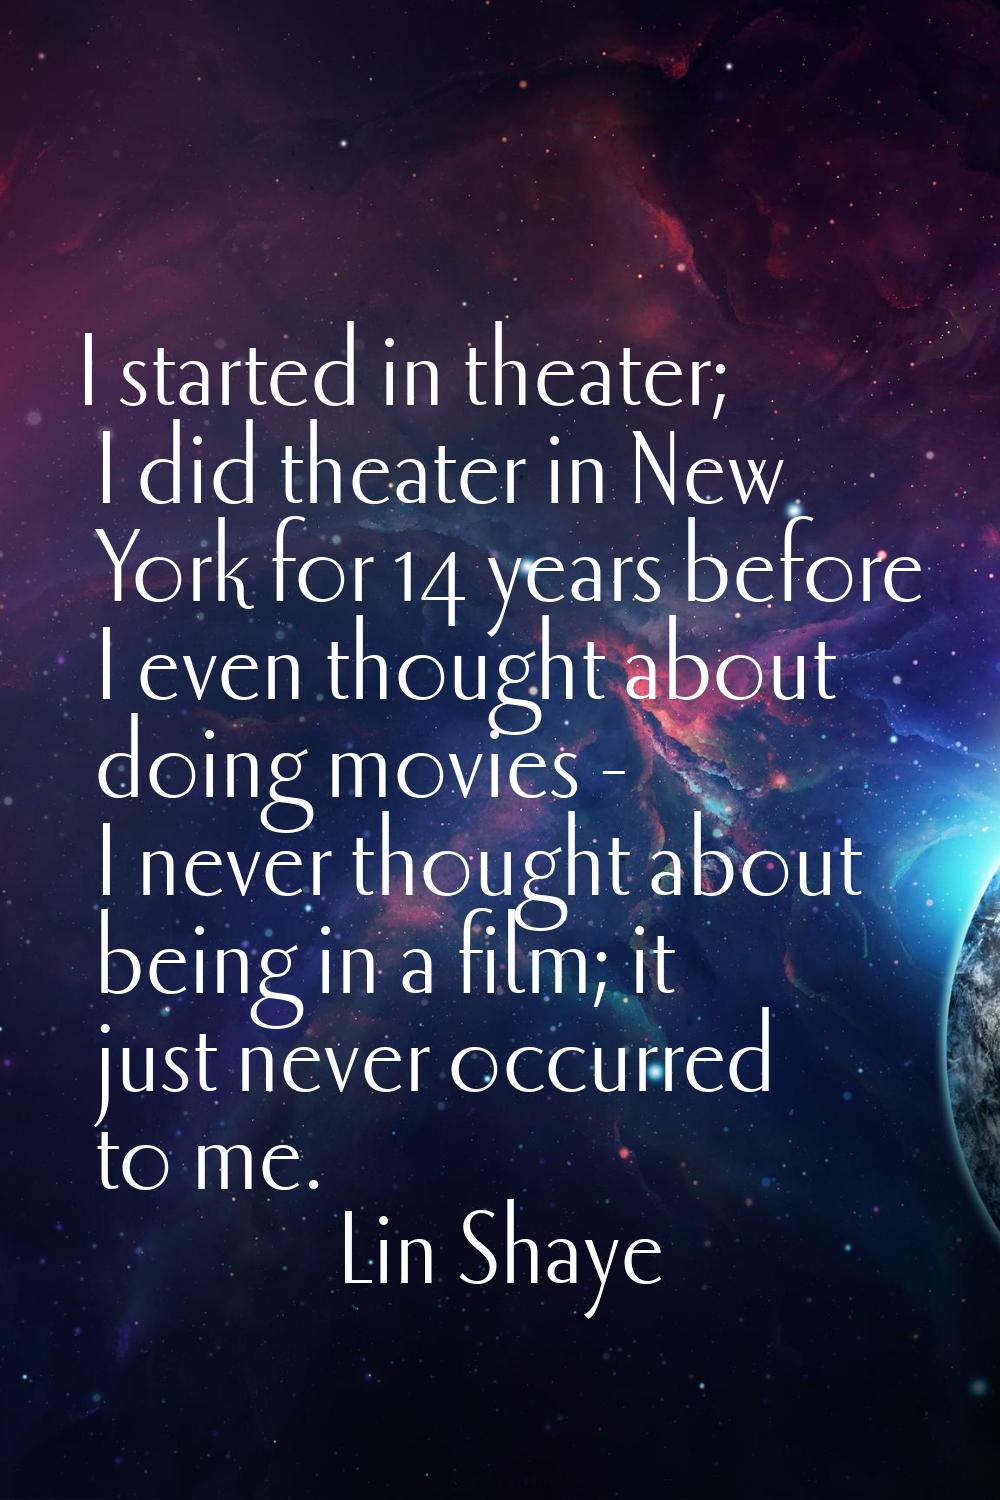 I started in theater; I did theater in New York for 14 years before I even thought about doing movi